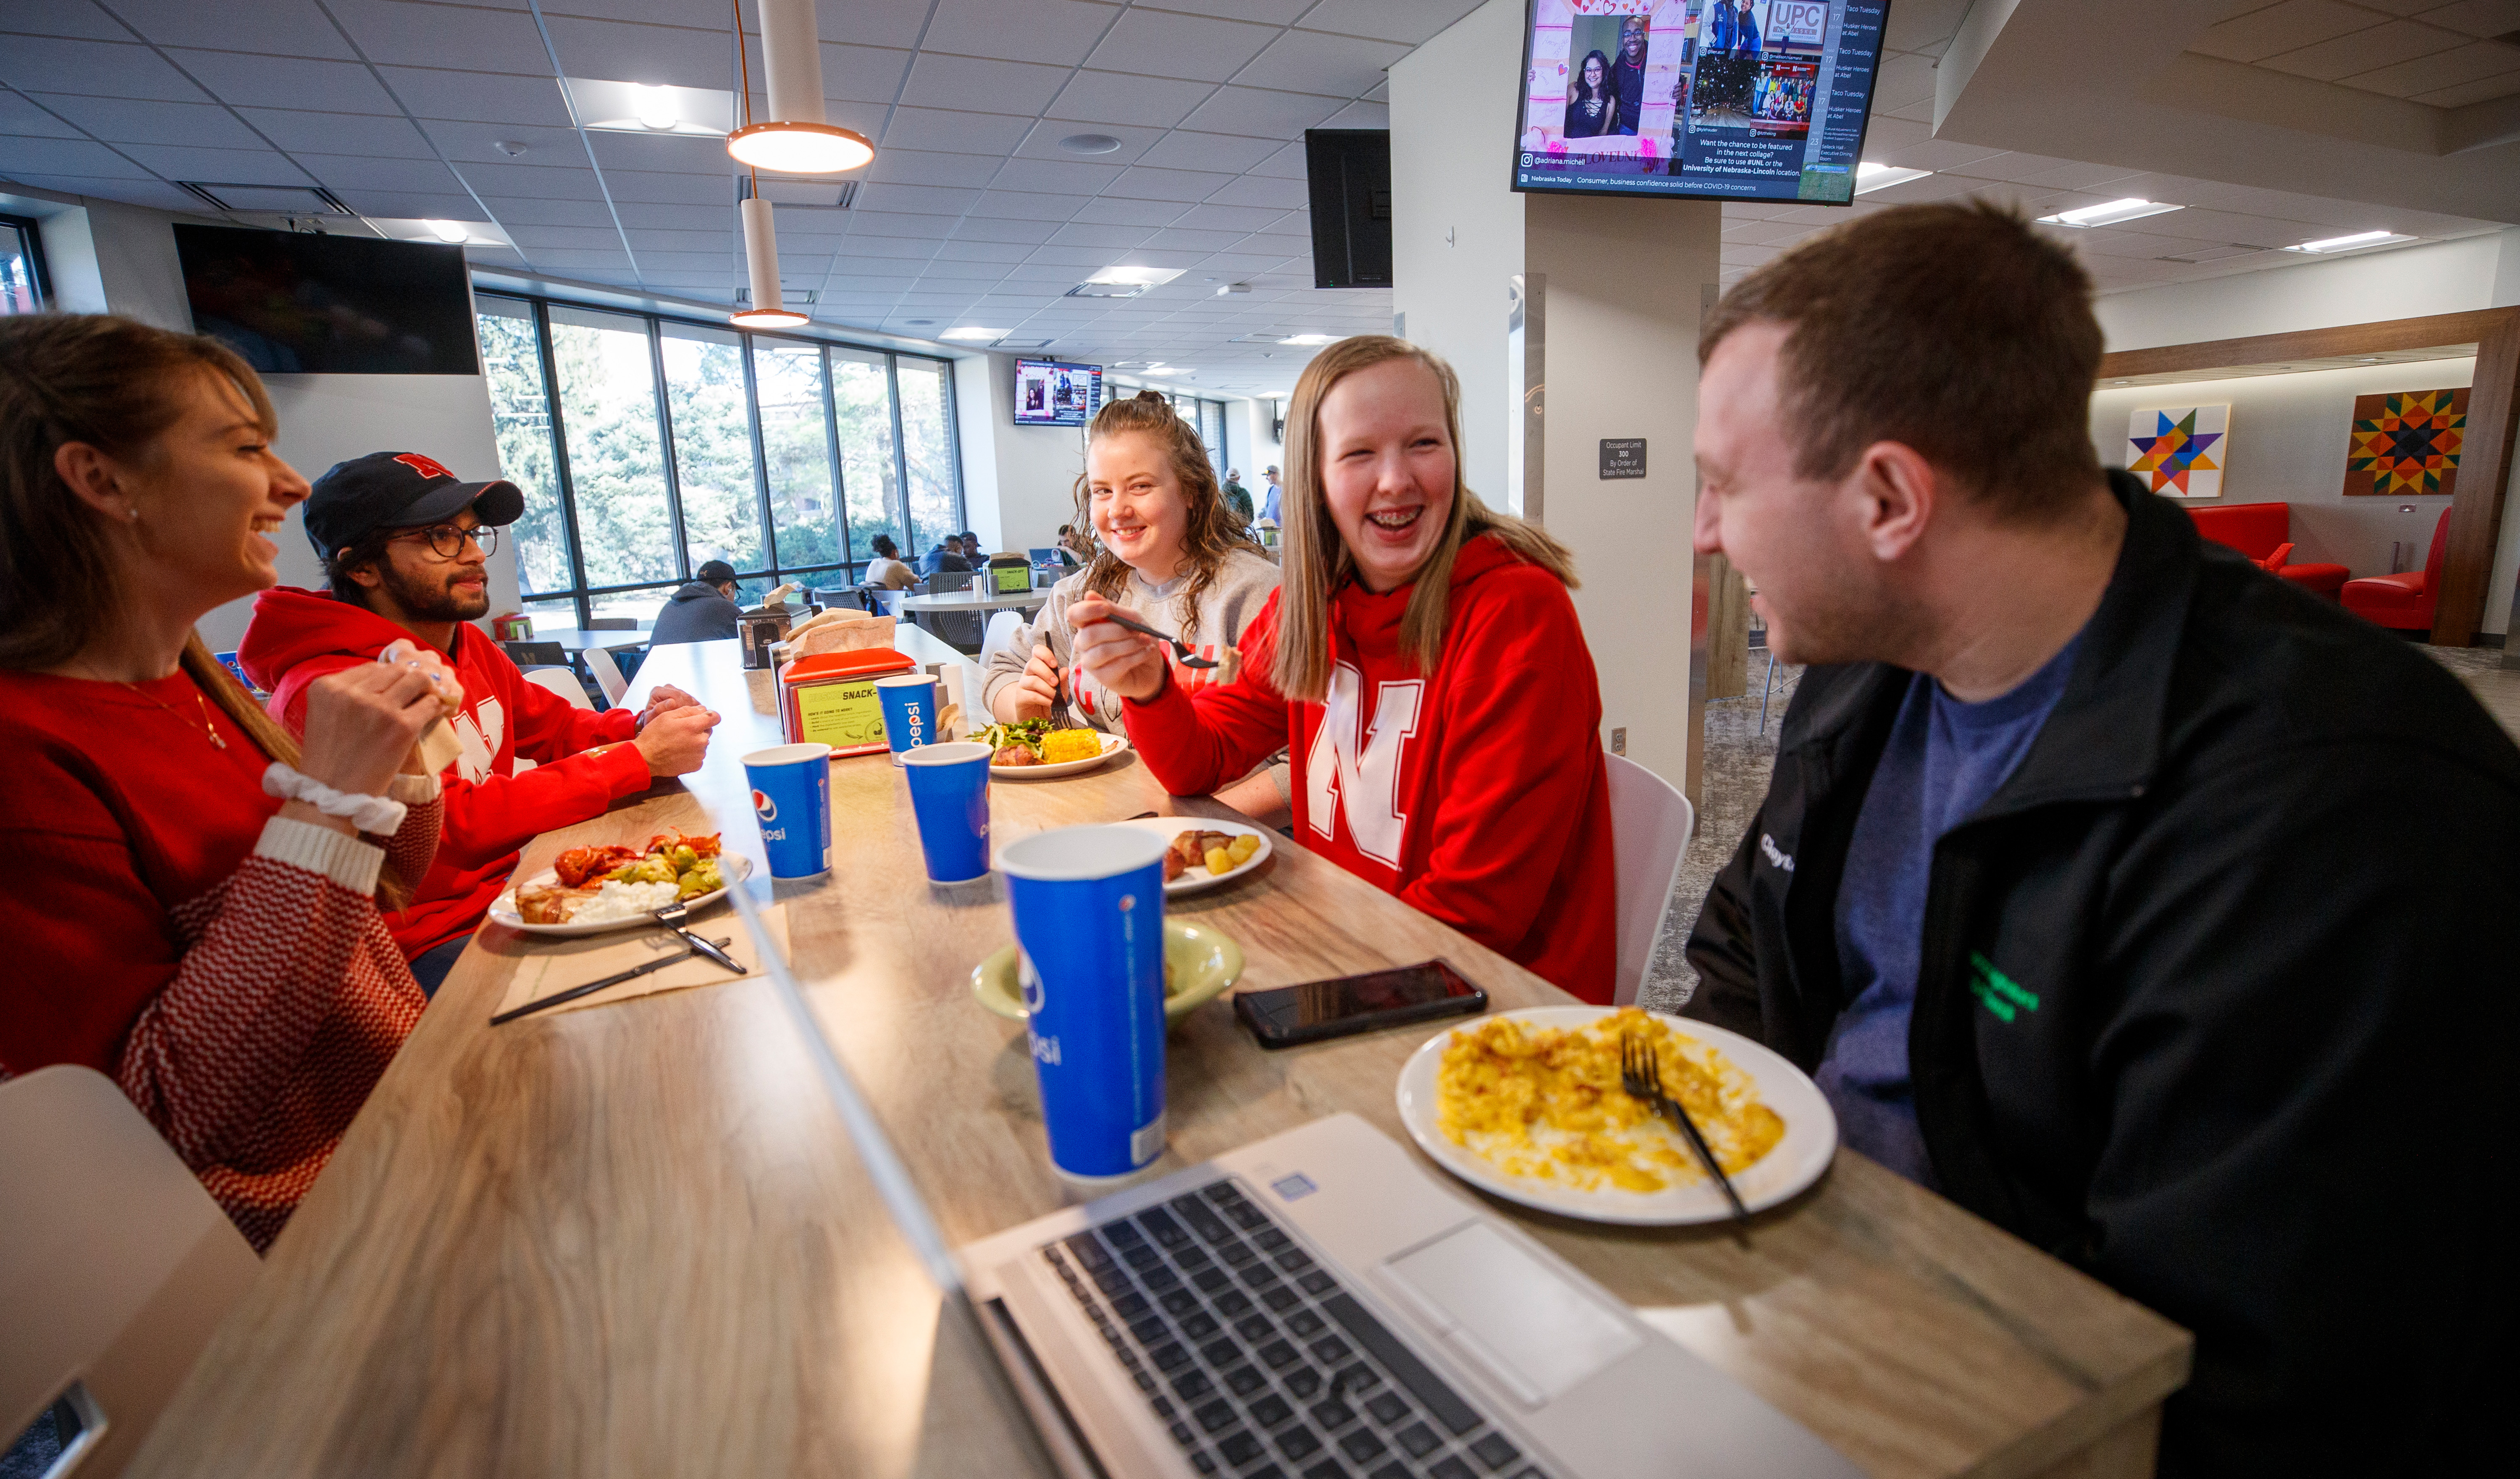 Students enjoy a meal and conversation at the East Campus Dining Center